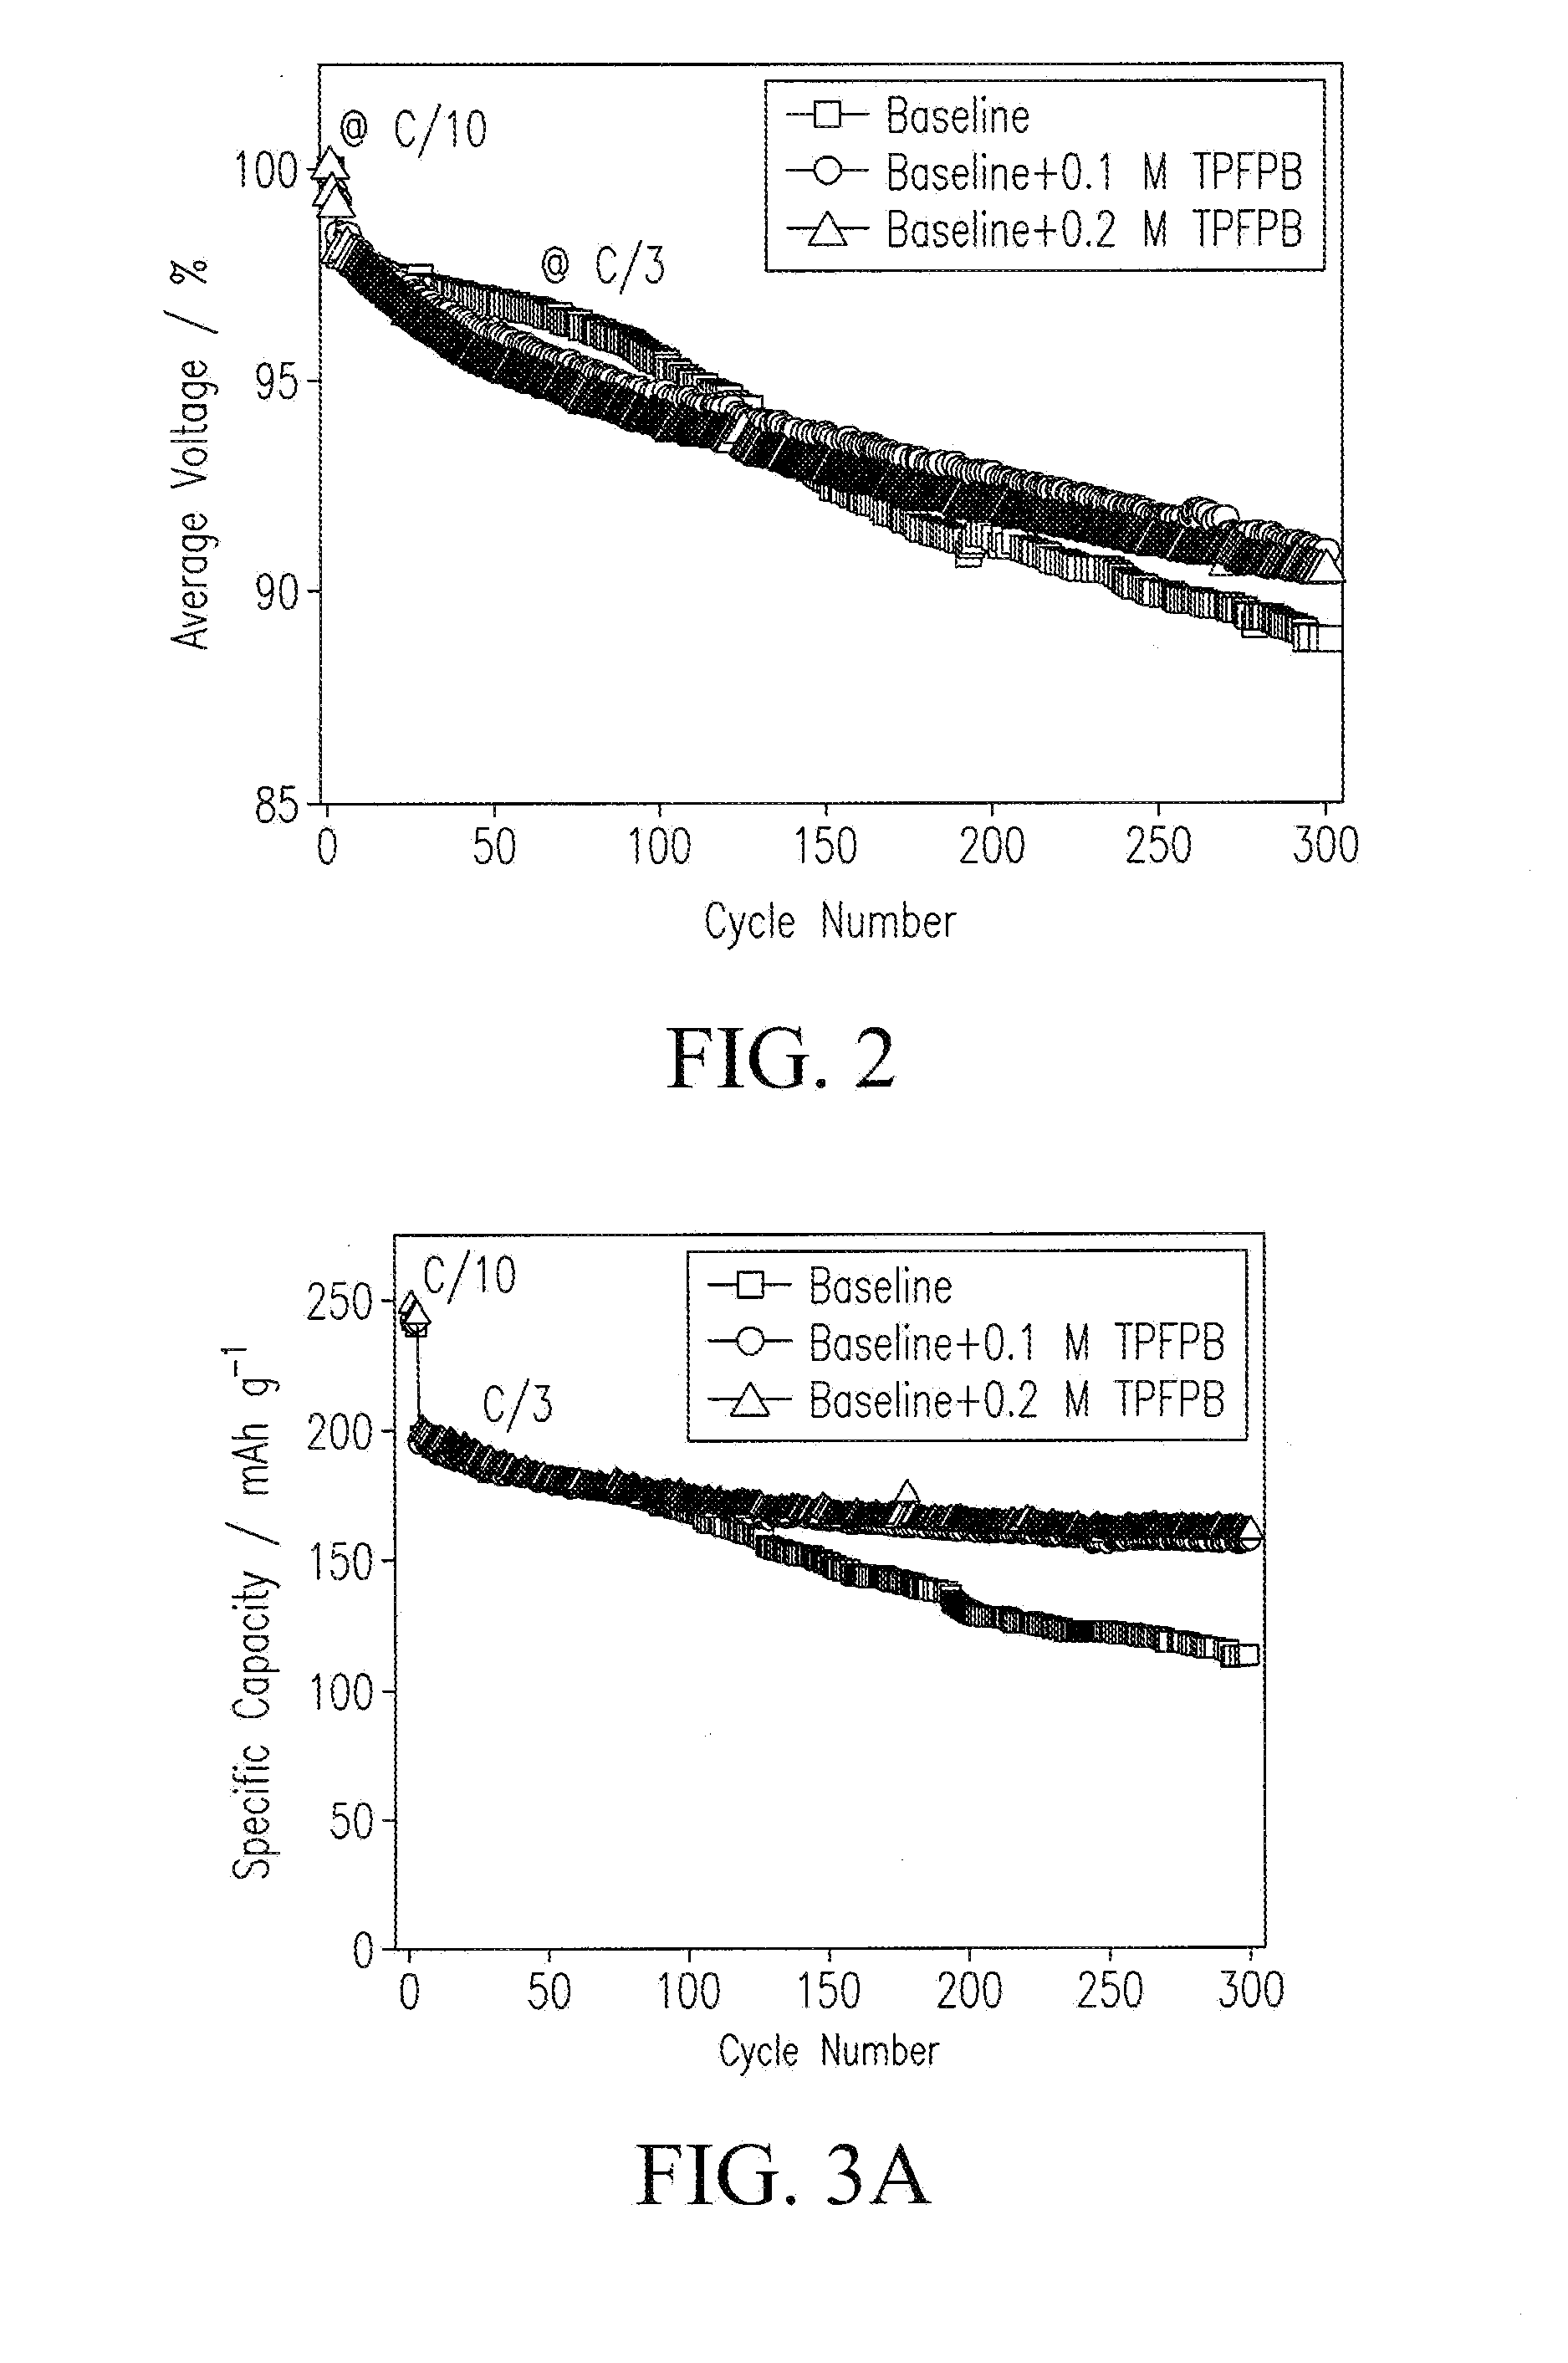 Electrolyte additives for lithium ion battery and lithium ion battery containing same